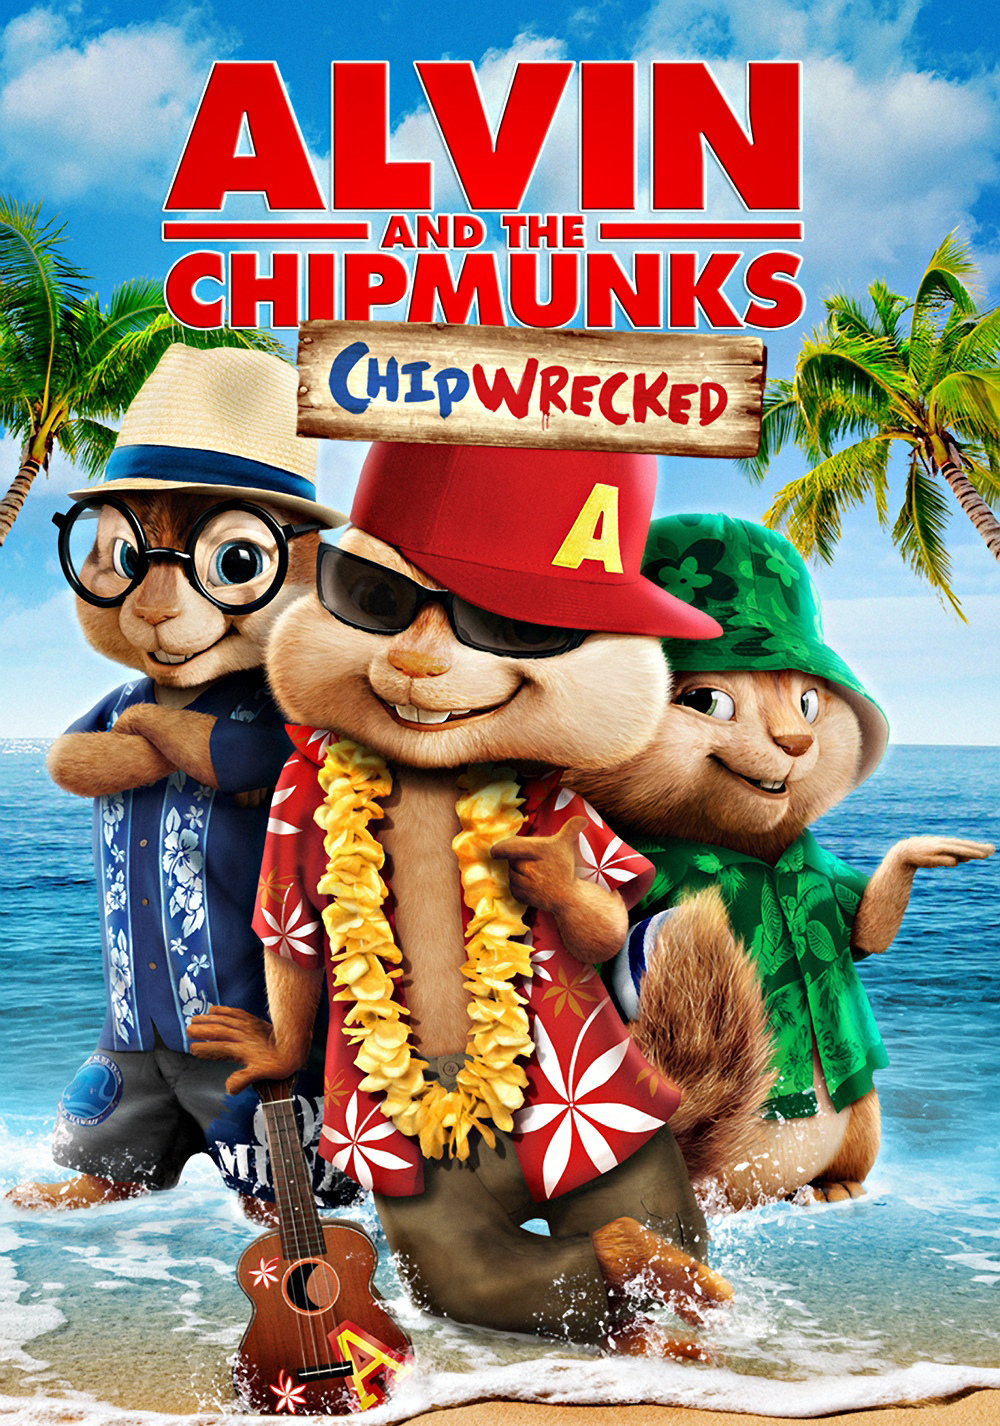 alvin and the chipmunk movie downloads isaimini.com